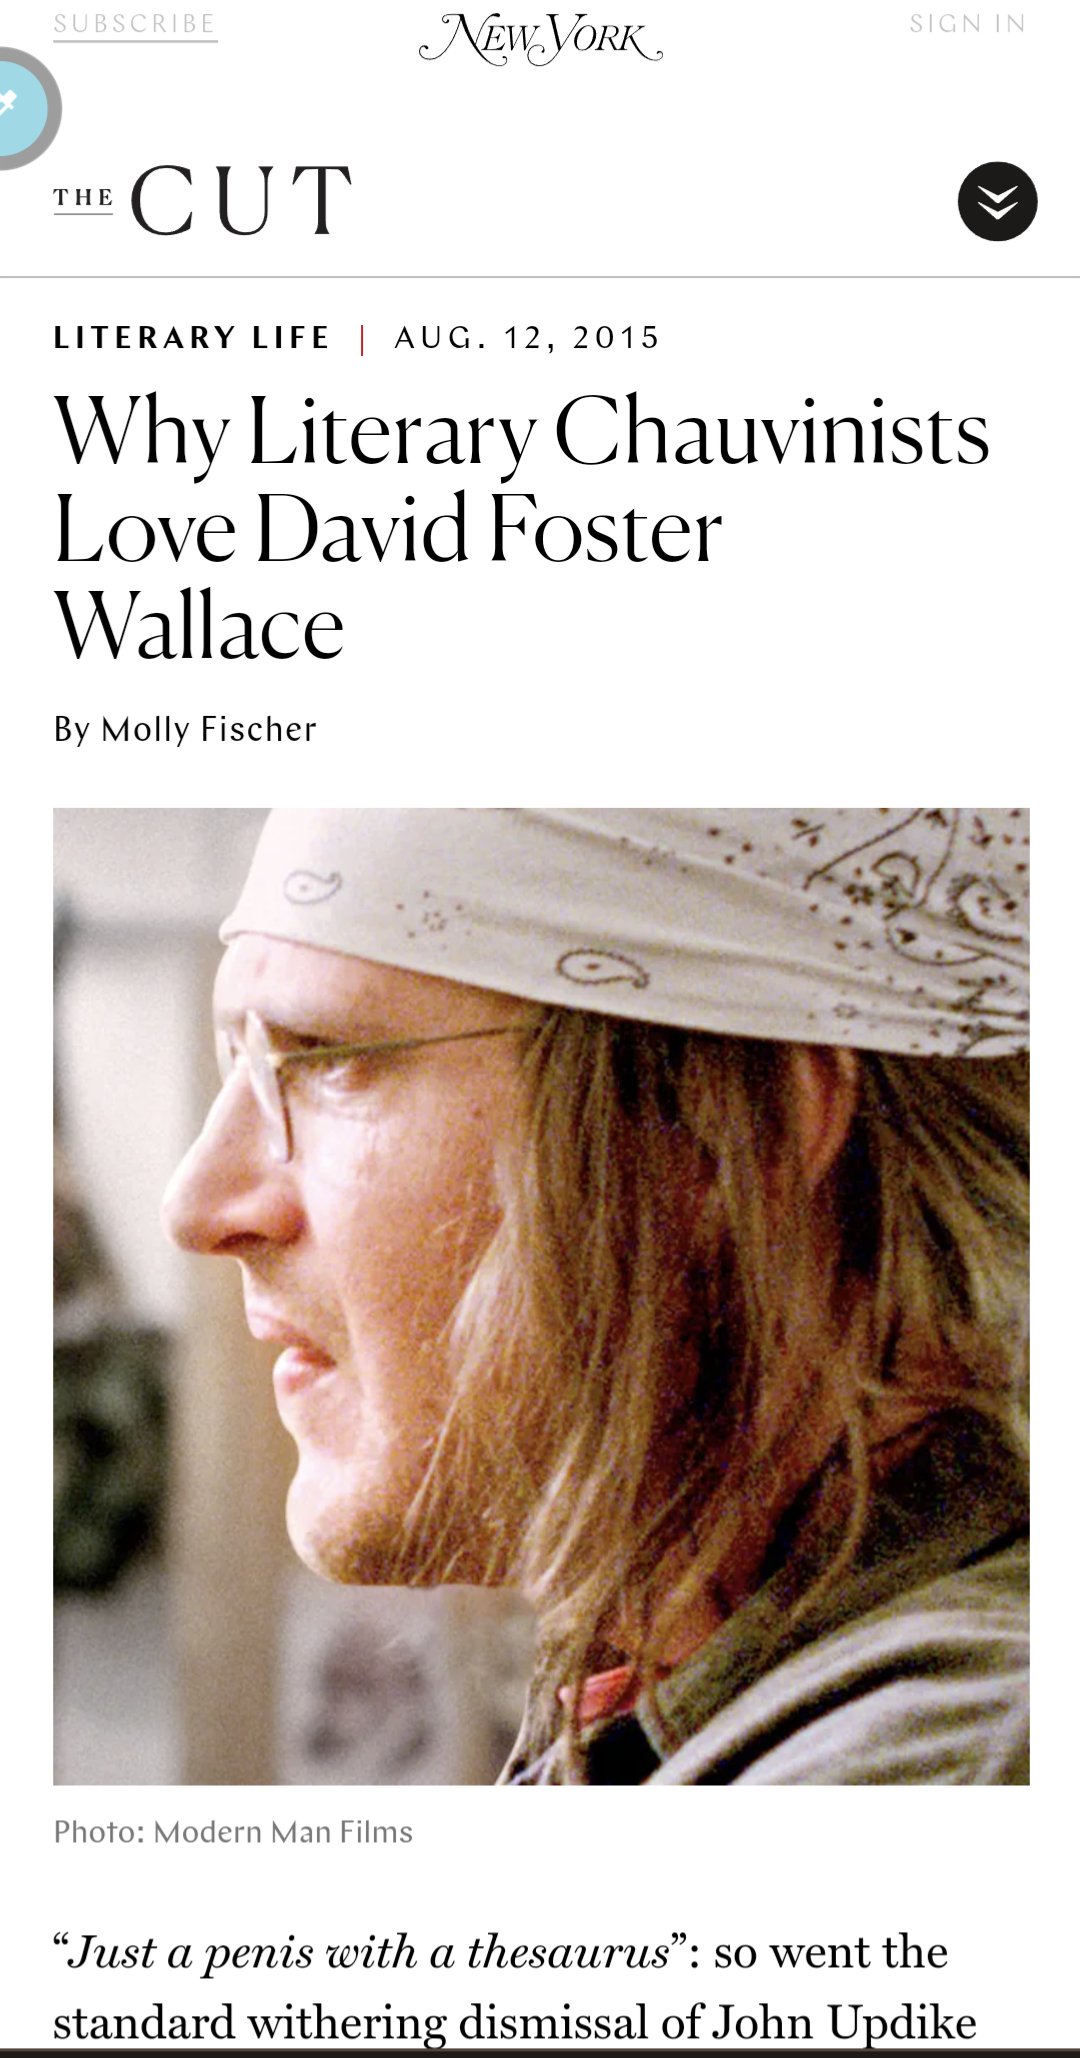 Why Literary Chauvinists Love David Foster Wallace